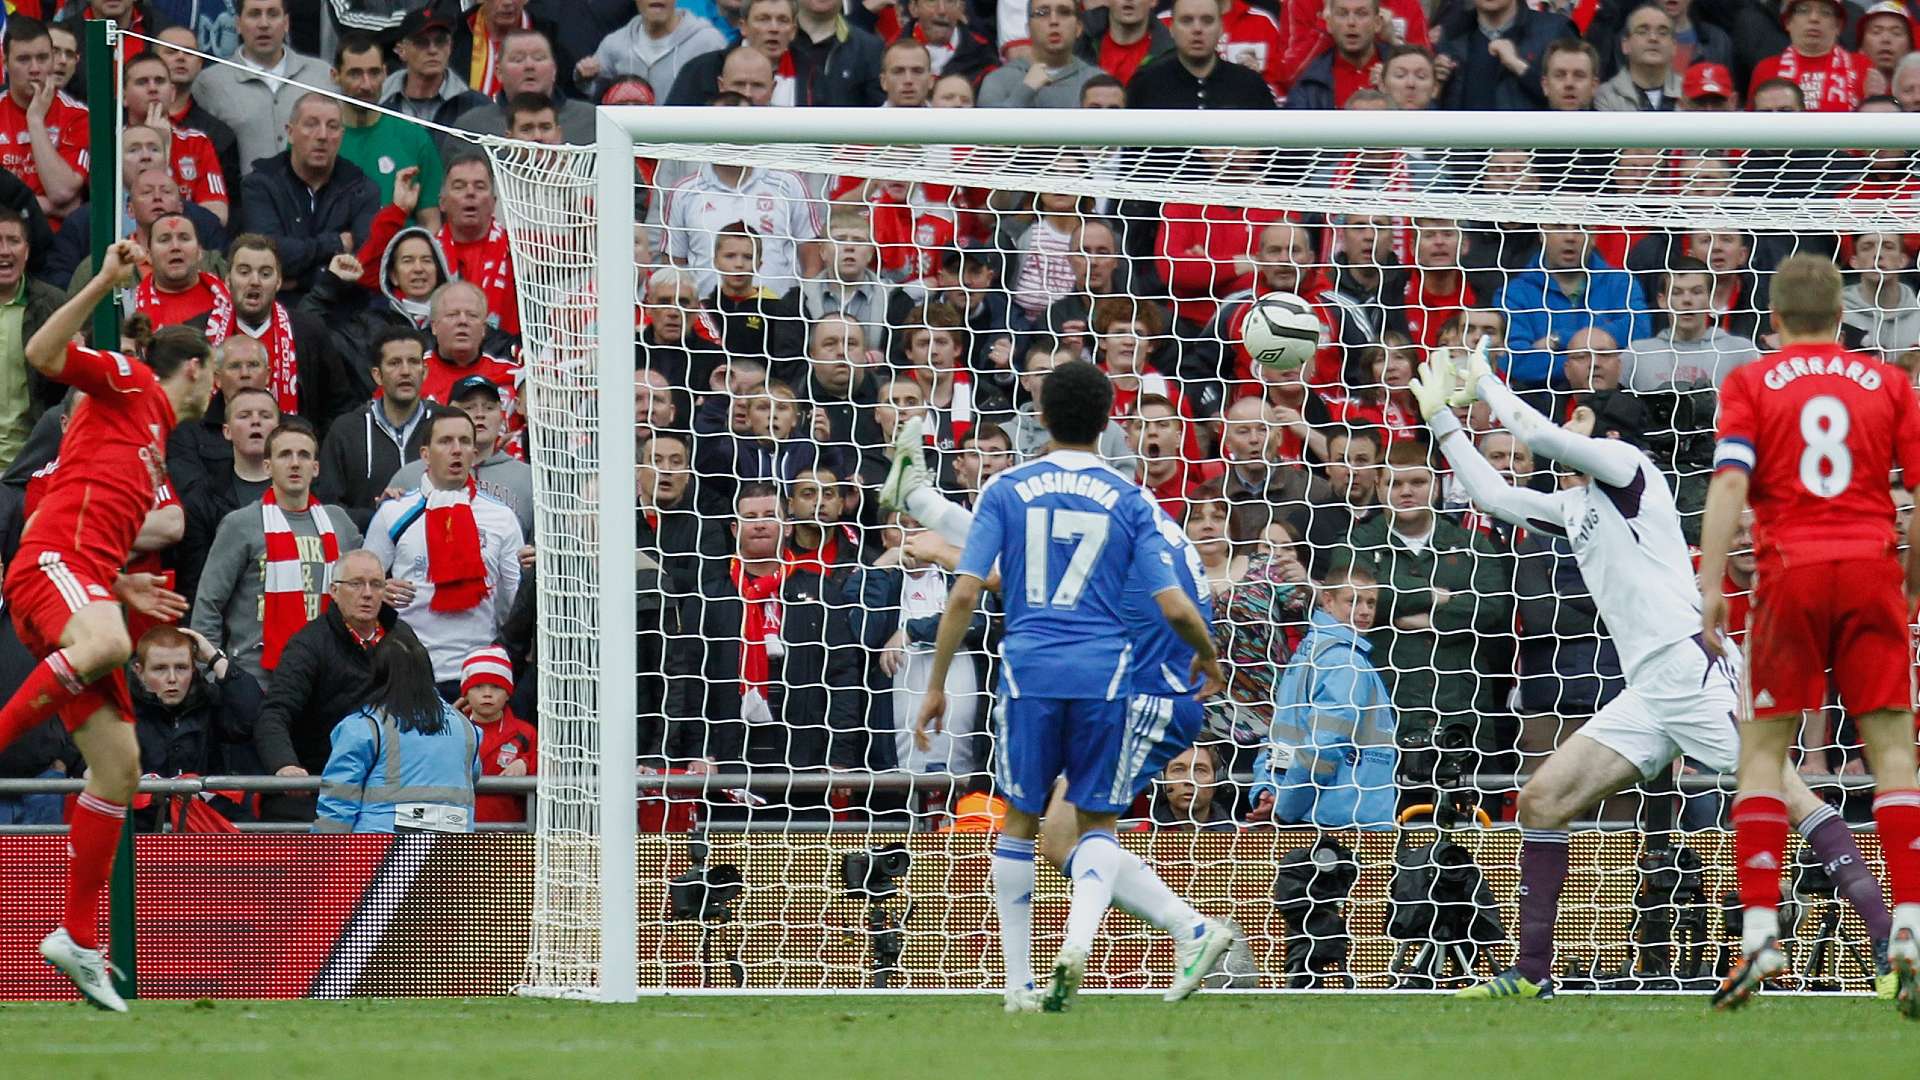 Petr Cech's incredible save 2012 FA Cup final - Chelsea, Liverpool